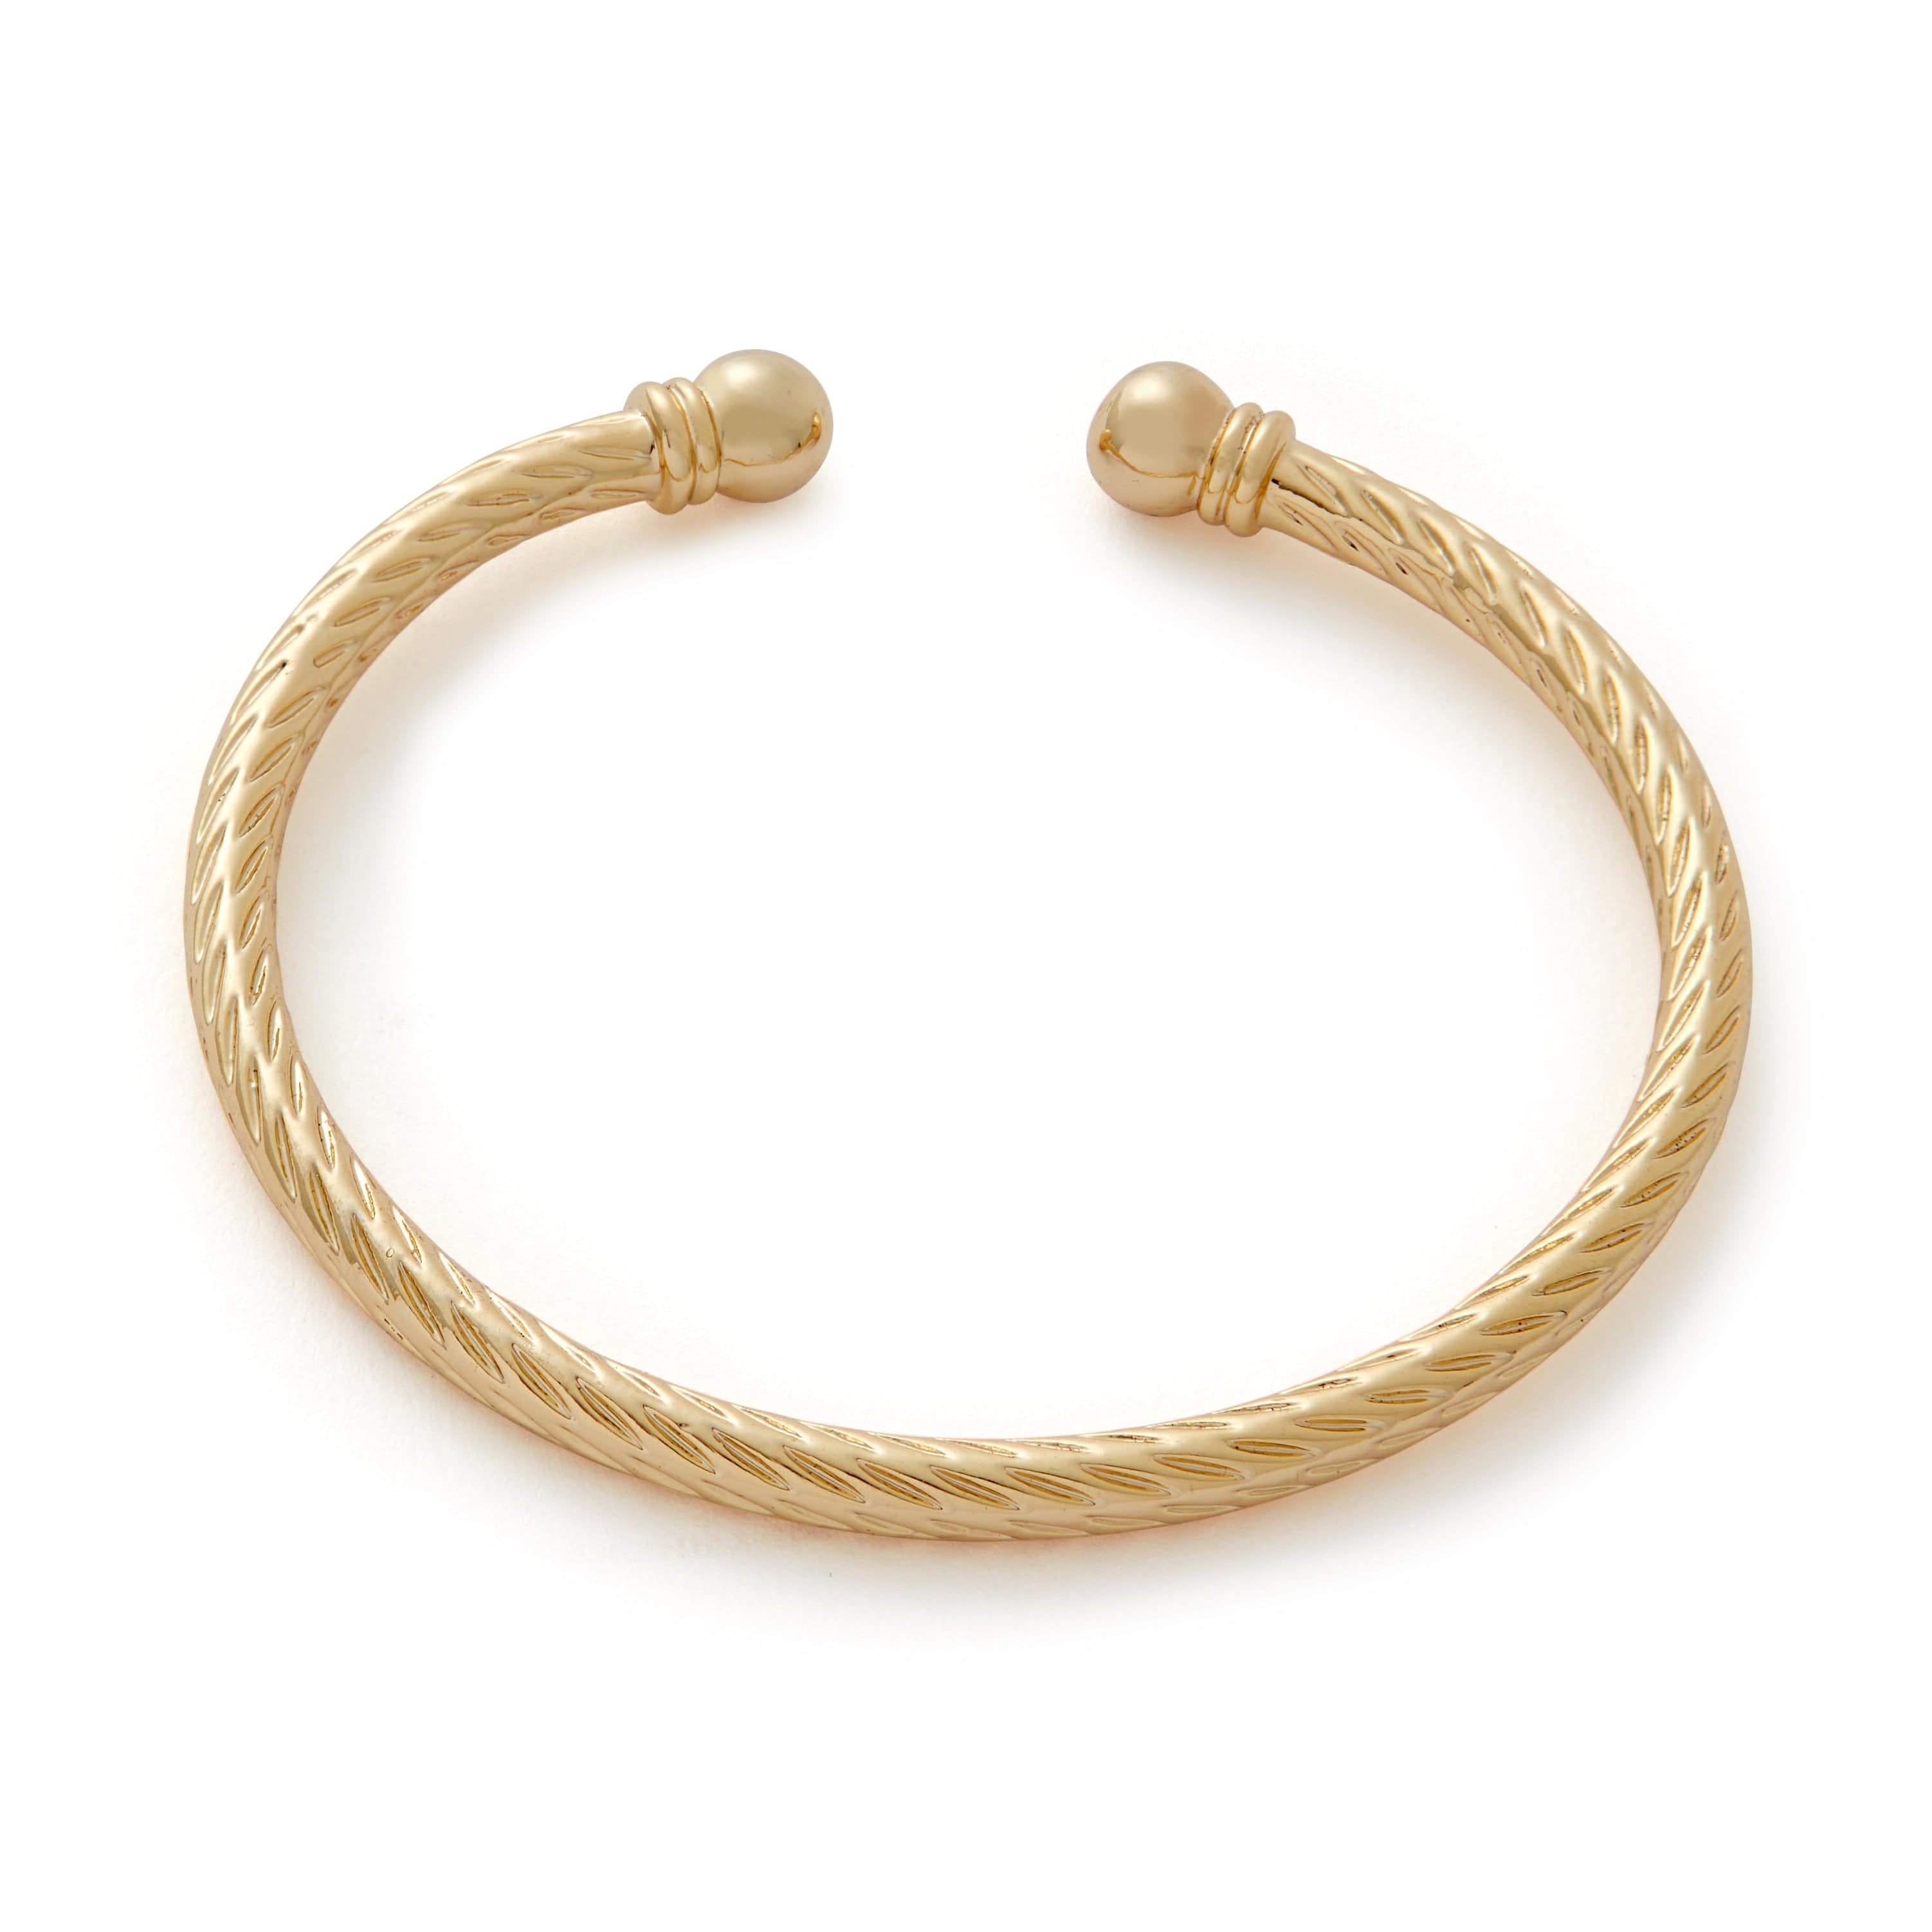 Gold Ball Torque Bangle with 4mm Band and 8mm Ball - All Sizes